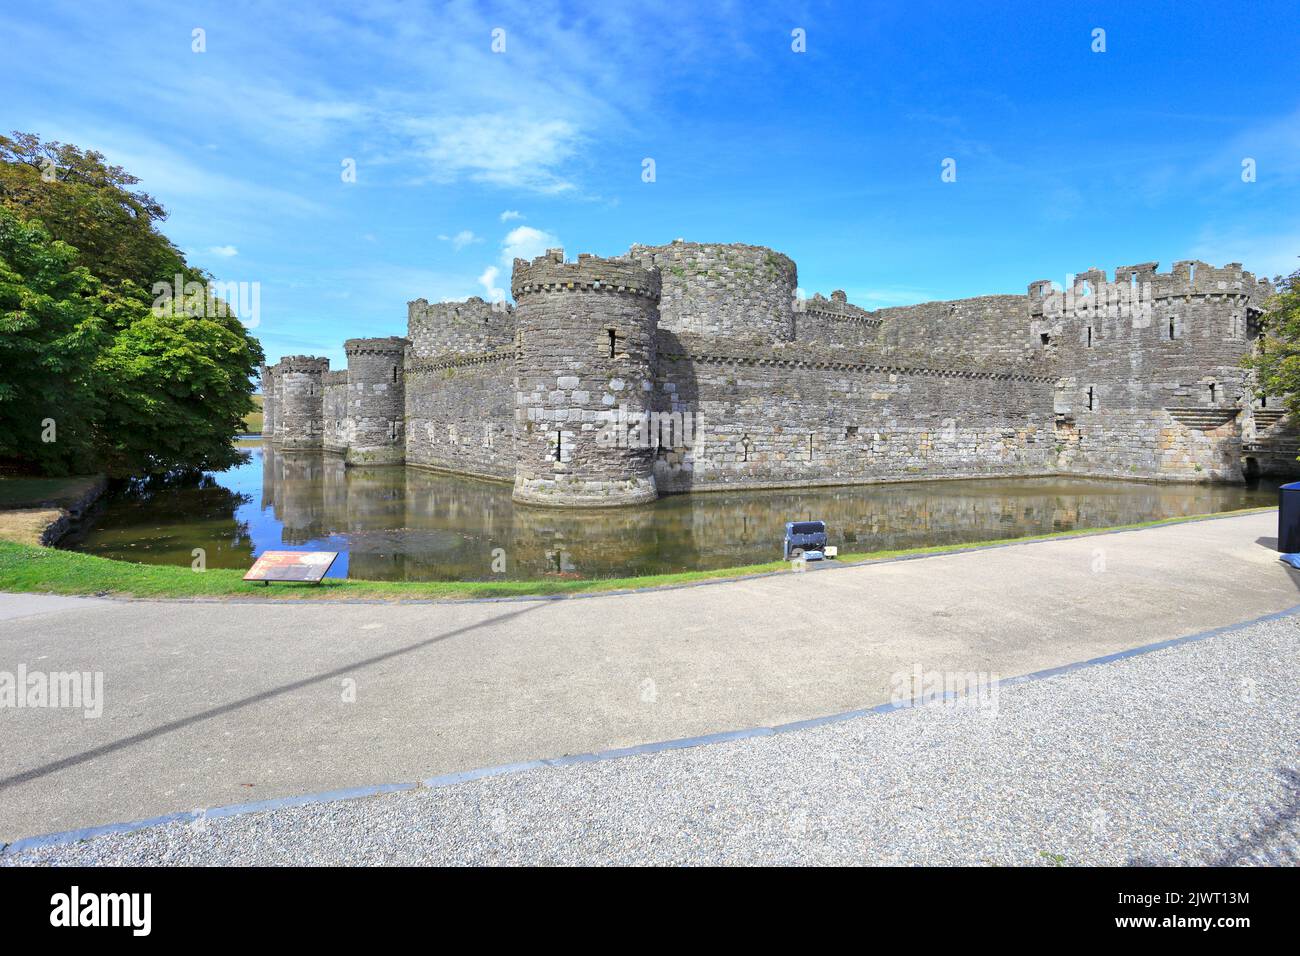 Beaumaris Castle from outside the grounds, Beaumaris, Isle of Anglesey, Ynys Mon, North Wales, UK. Stock Photo